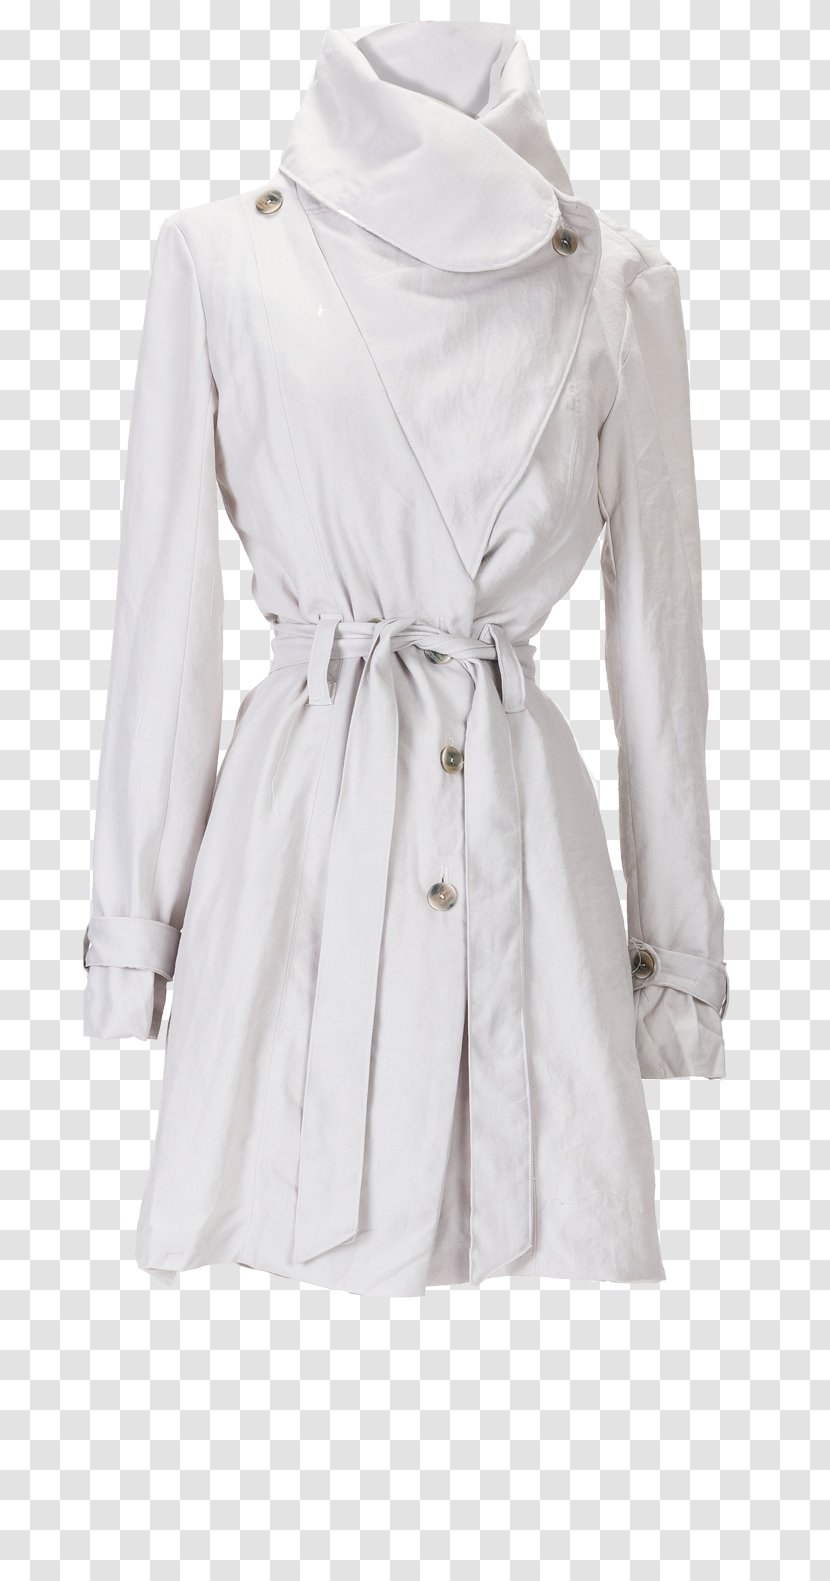 Trench Coat Overcoat Sleeve Dress - White Transparent PNG